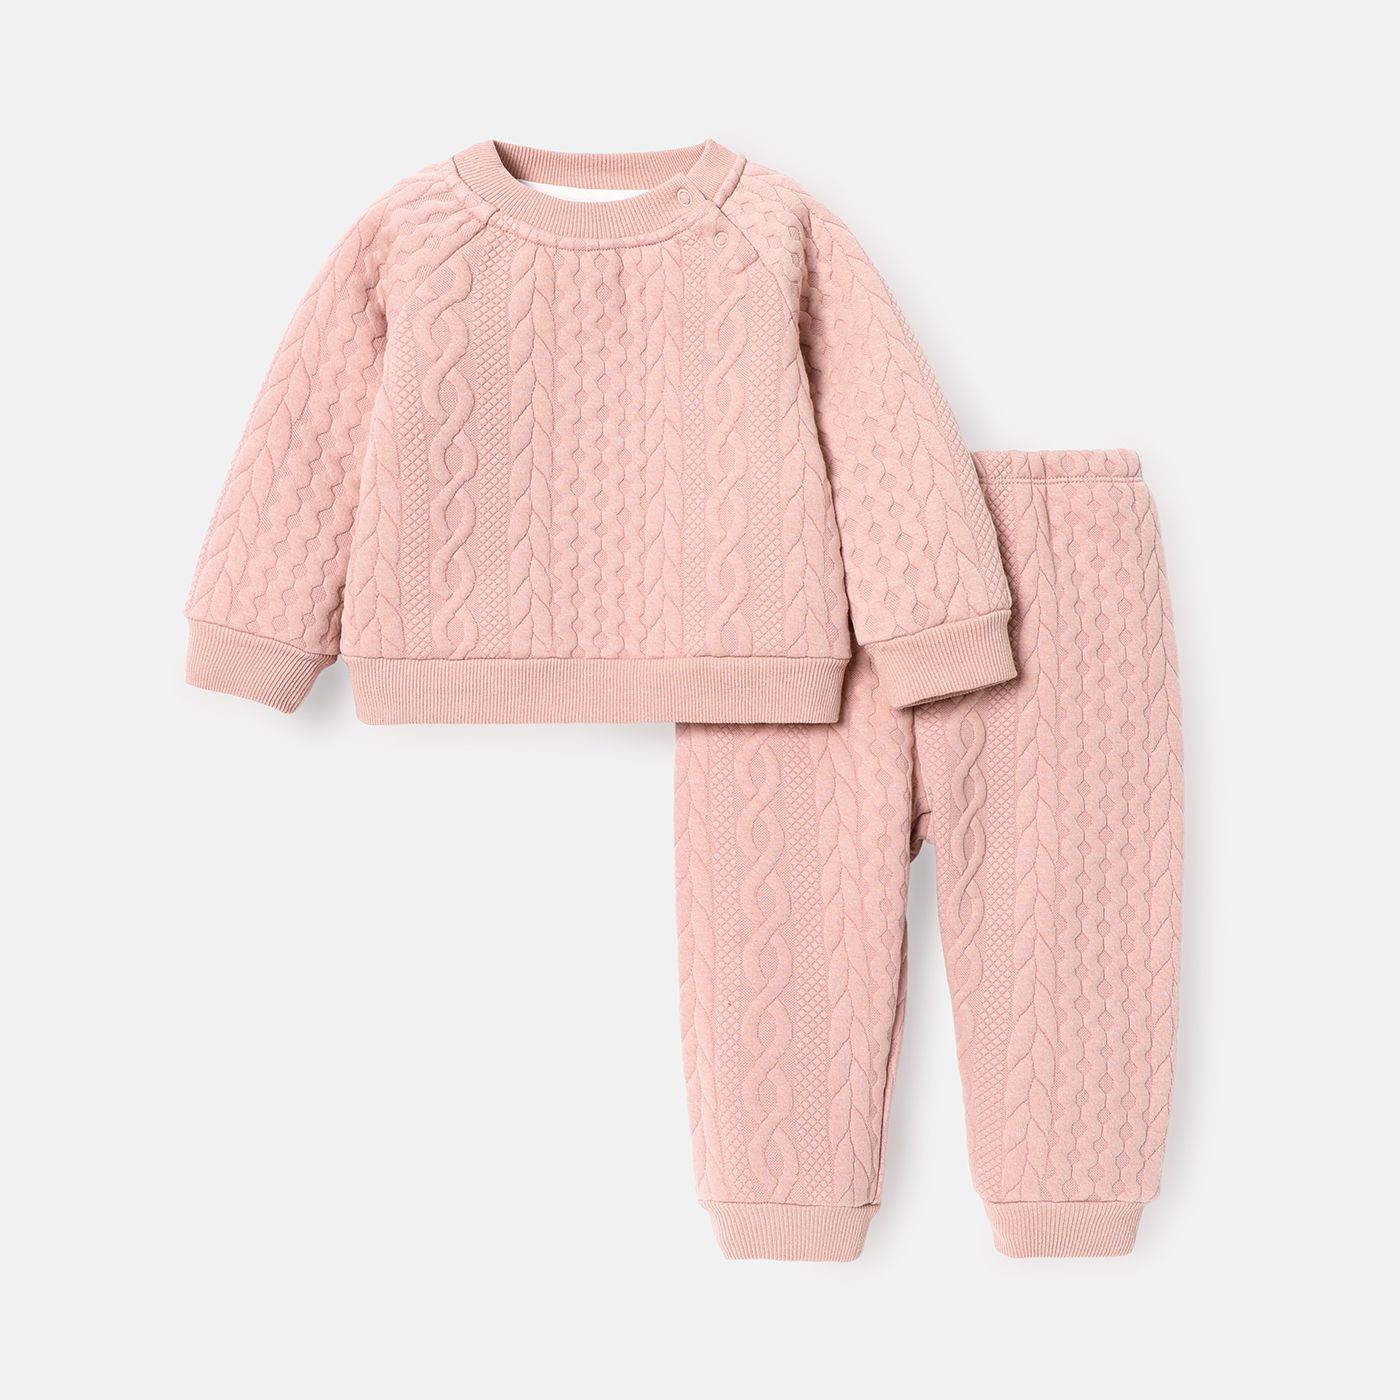 2pcs Baby Boy Solid Color Cable Knit Textured Long-sleeve Sweatshirt and Elasticized Pants Set